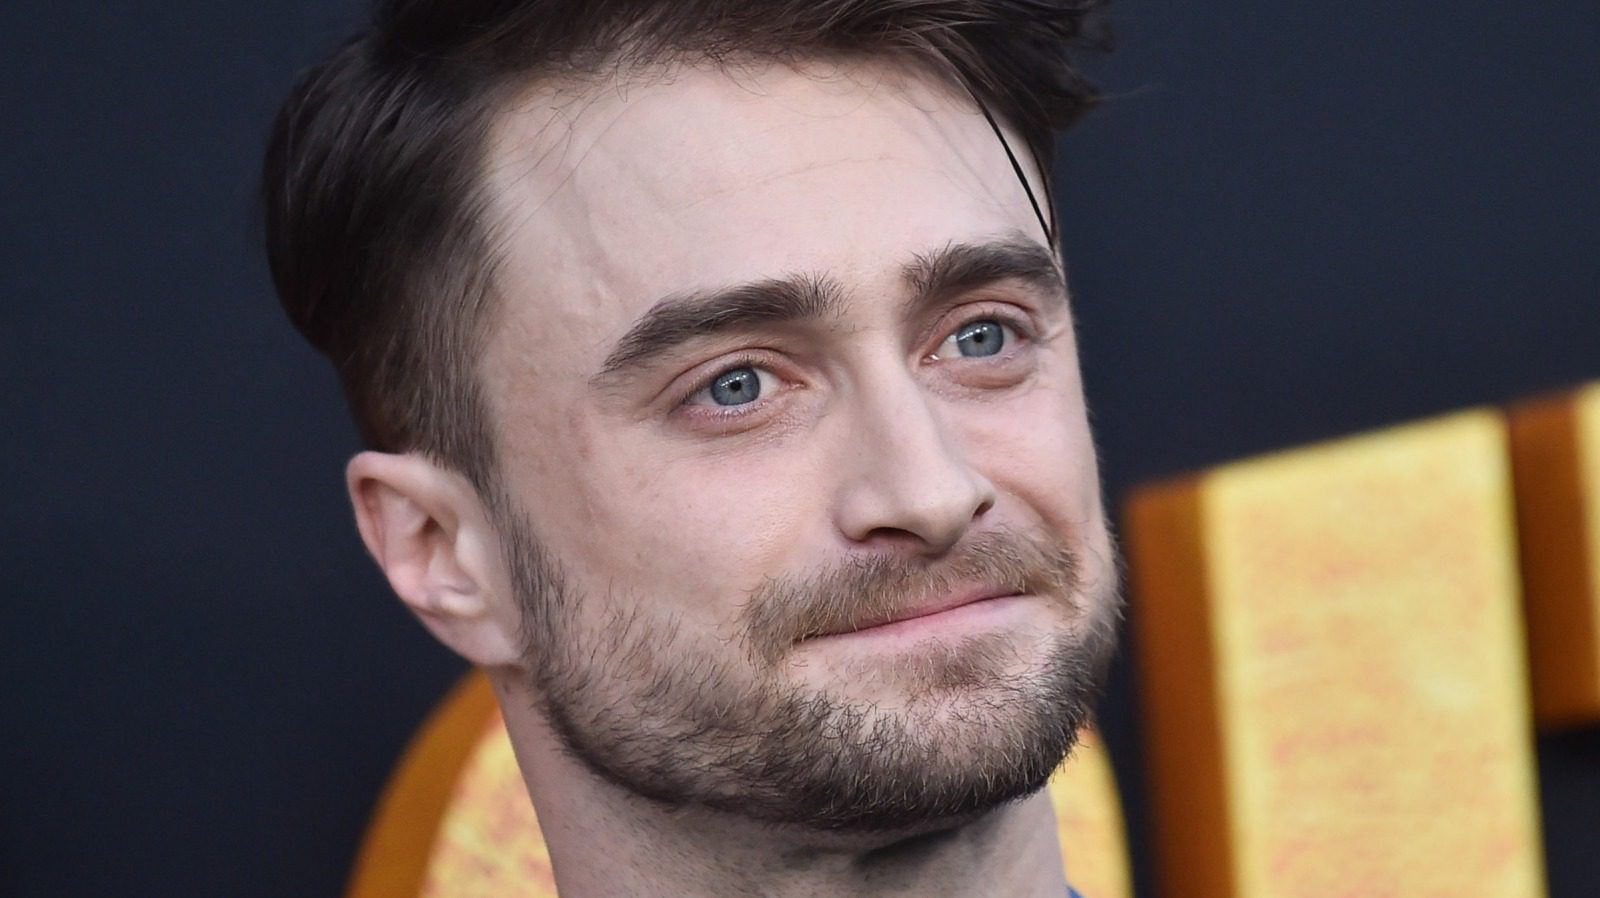 Daniel Radcliffe Uses Star Wars As A Template For A Potential Return To Harry Potter